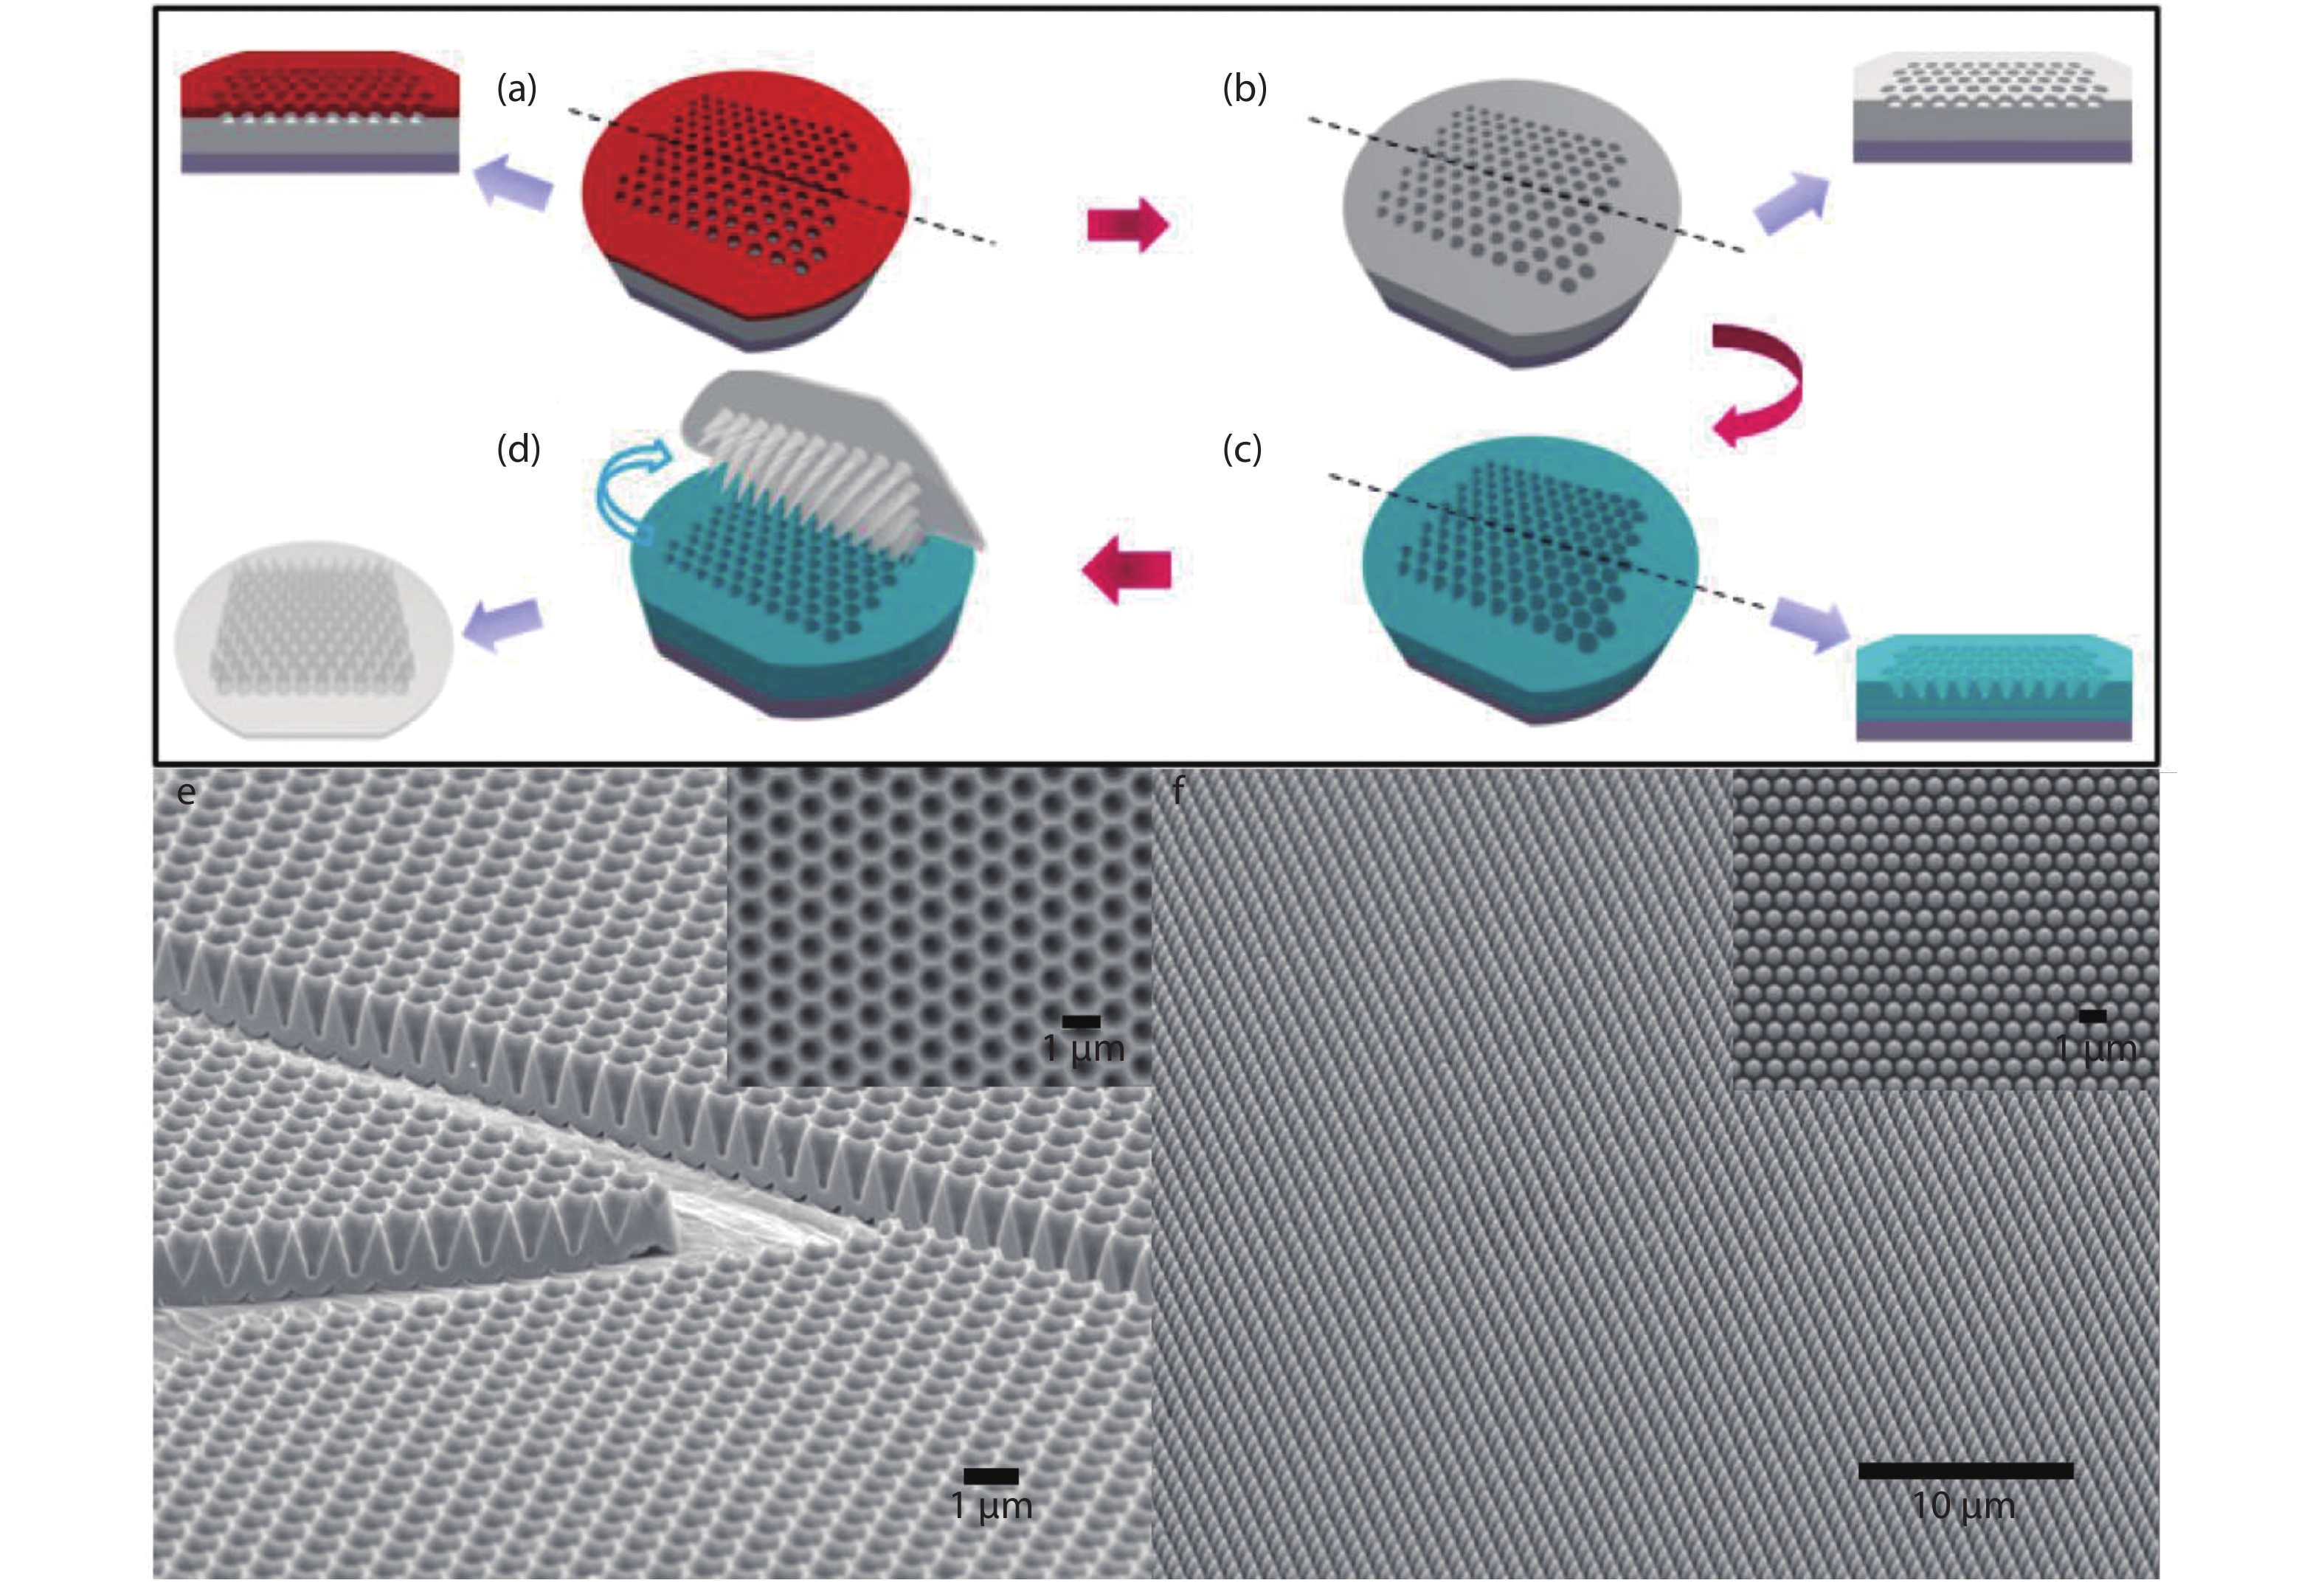 (Color online) Schematic diagram of fabrication process of i-cone mold and AR film, and SEM images of Au-coated mold and PDMS nanocone. (a) A 4-inch glass wafer with sputtered 5 μm pure aluminum on the surface underwent photolithography of 1 μm hexagonal array pattern. (b) The pattern wafer underwent dry etching to form 50 nm-depth nanoindentation. (c) The wafer underwent anodization to form i-nanocone arrays. (d) The replication and peeloff process of AR film. (e) SEM of Au-coated mold with 1 μm pitch and 1 μm depth. (f) SEM of nanocone with 1 μm pitch and 1 μm depth.